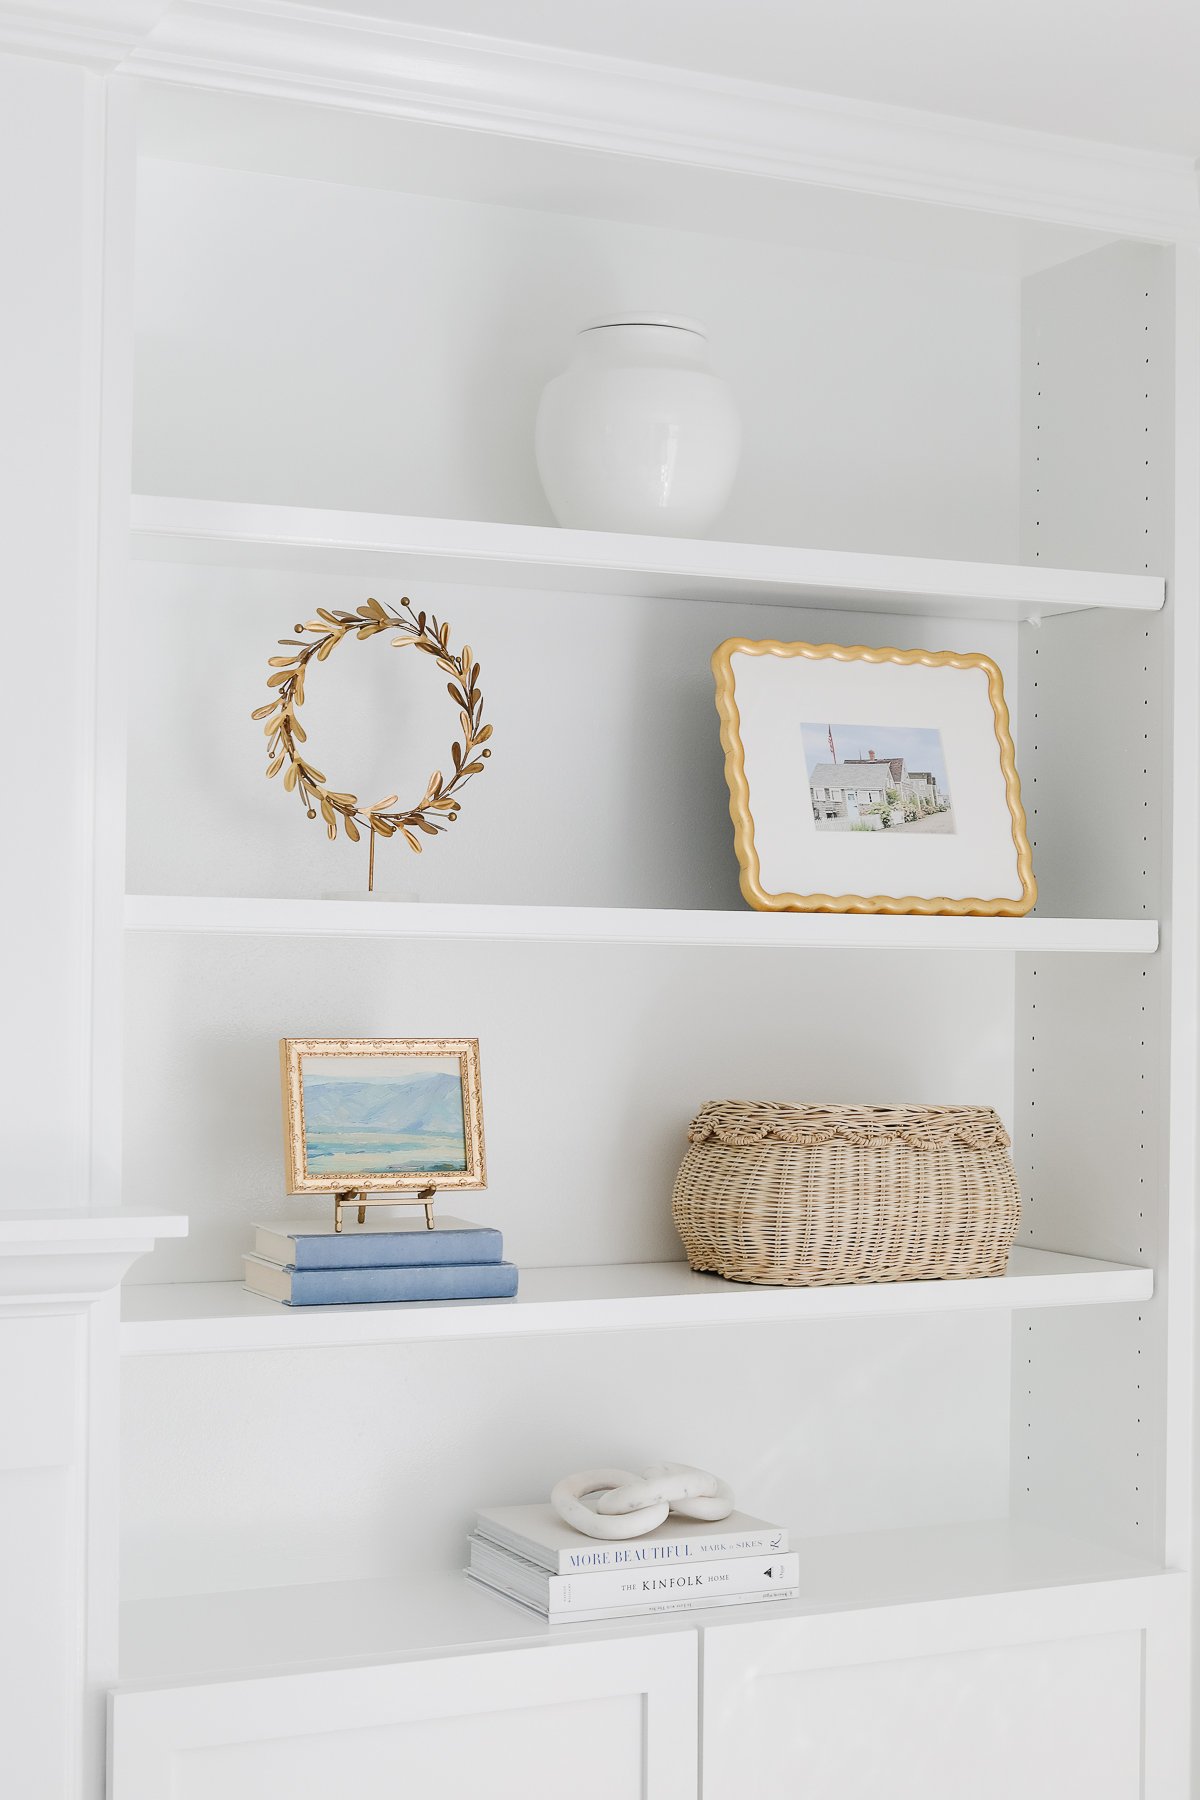 White bookshelves styles with a scalloped basket for organization.